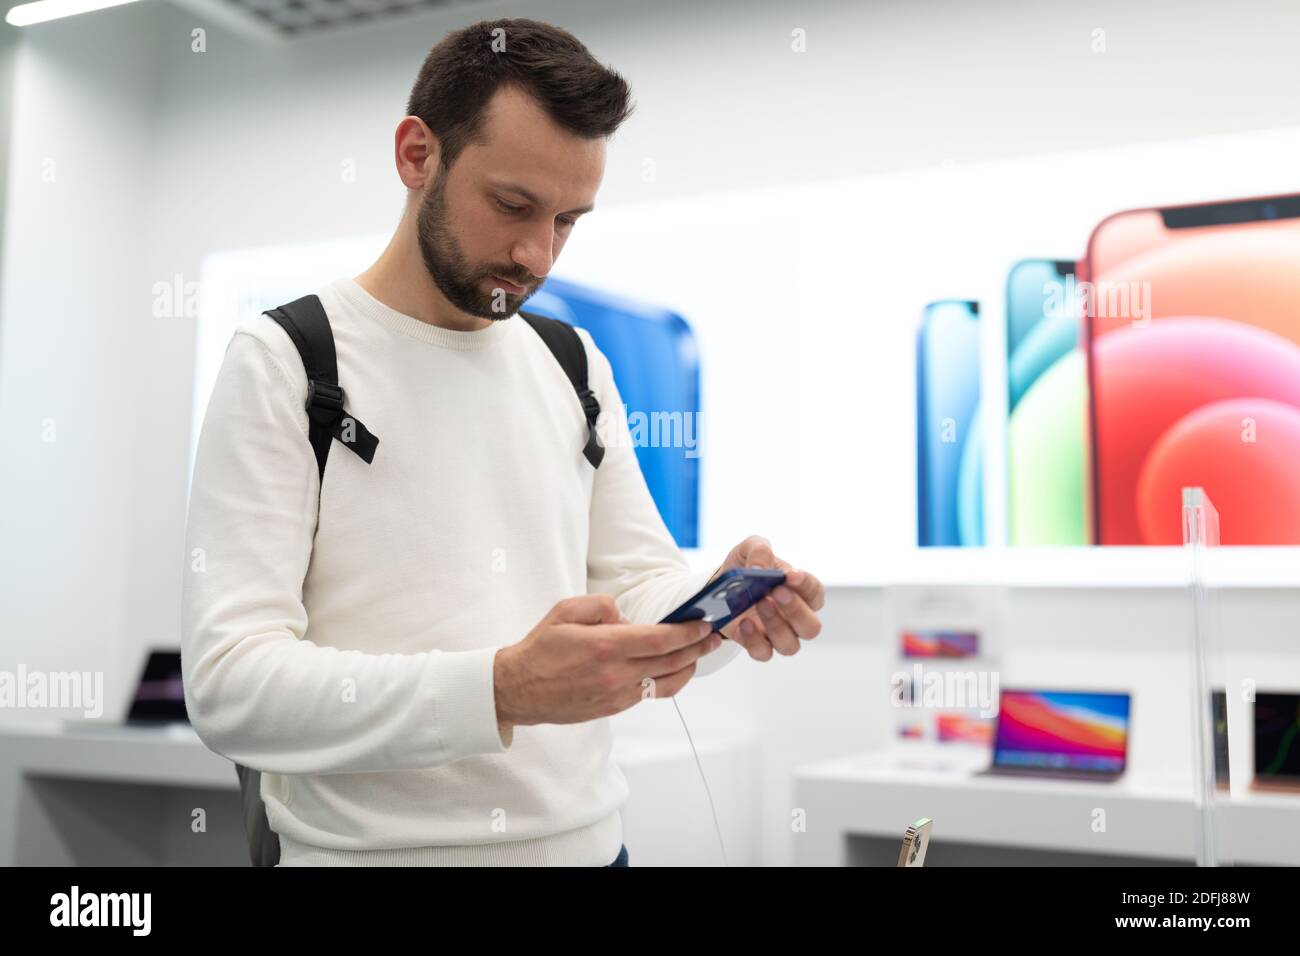 Belarus; December 05, 2020; a man buys an iPhone 12, chooses a gift in an epl brand salon, a modern smartphone with three cameras and a touch screen Stock Photo